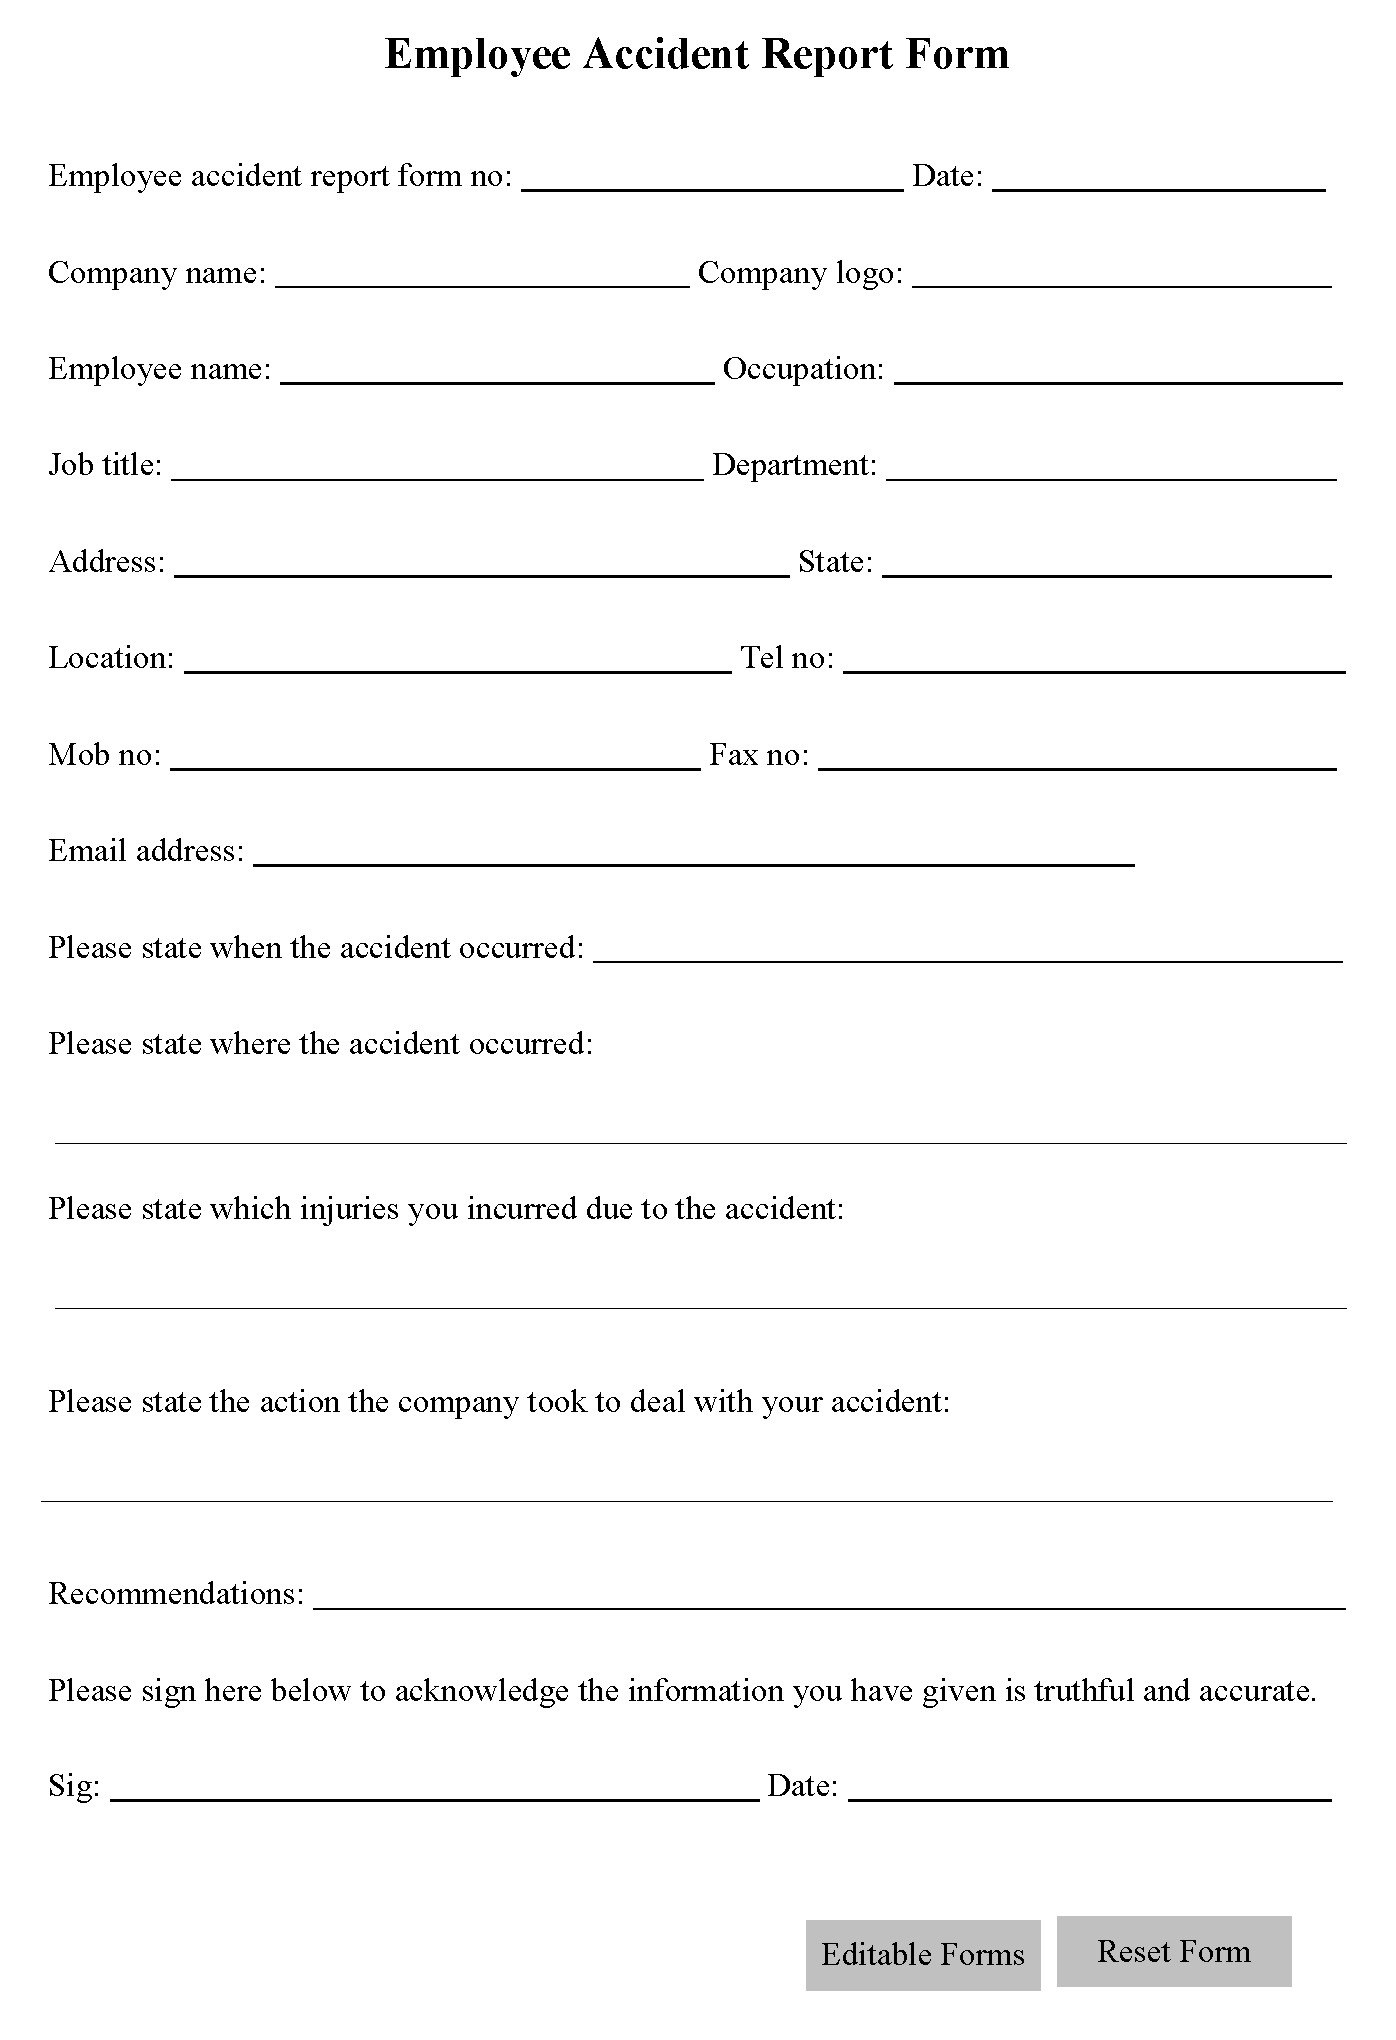 Work Place Accident Report Form Coloring Pages For Kids Plate intended for Vehicle Accident Report Form Template